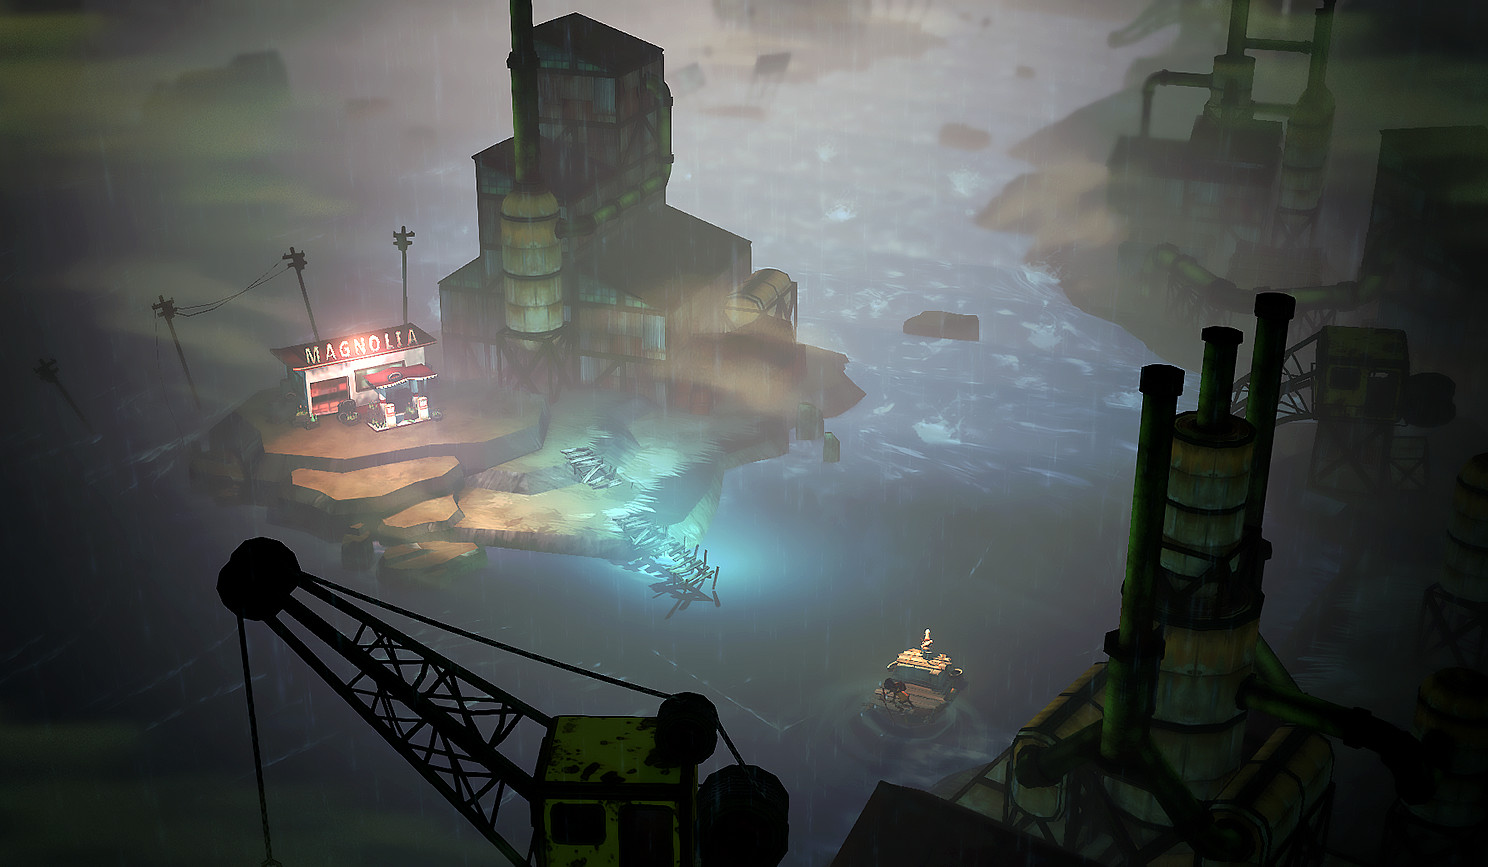 The Flame in the Flood Free Download